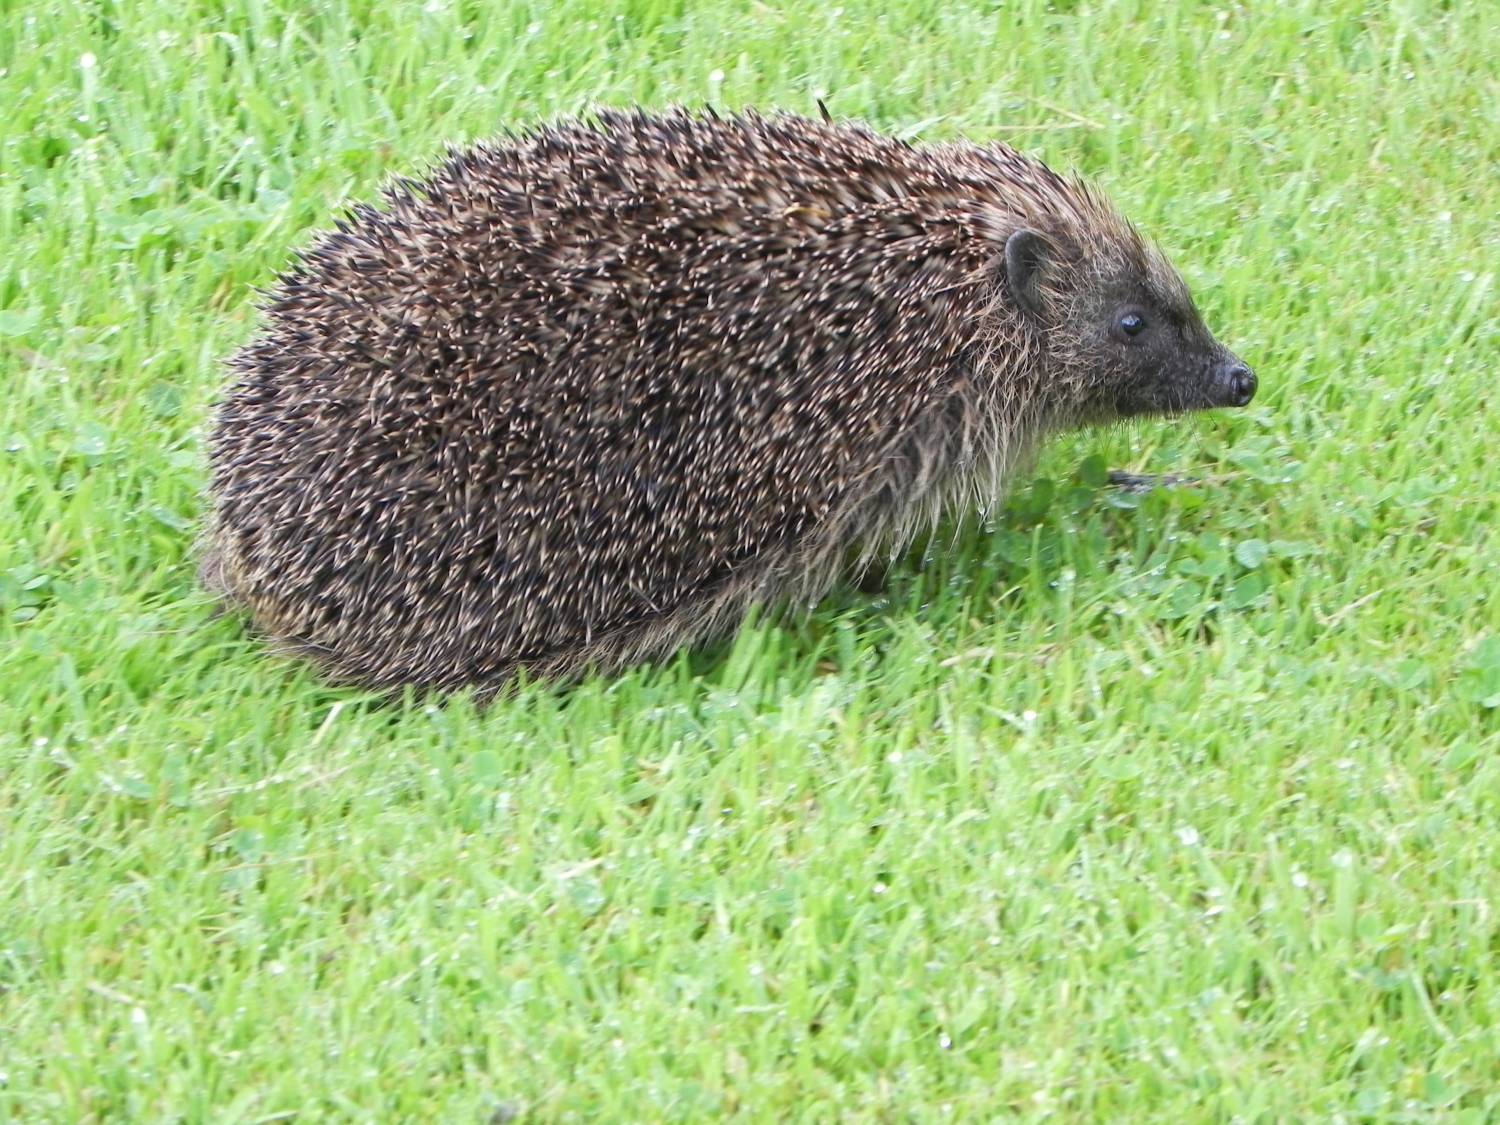 Hegdehog scurries across the lawn